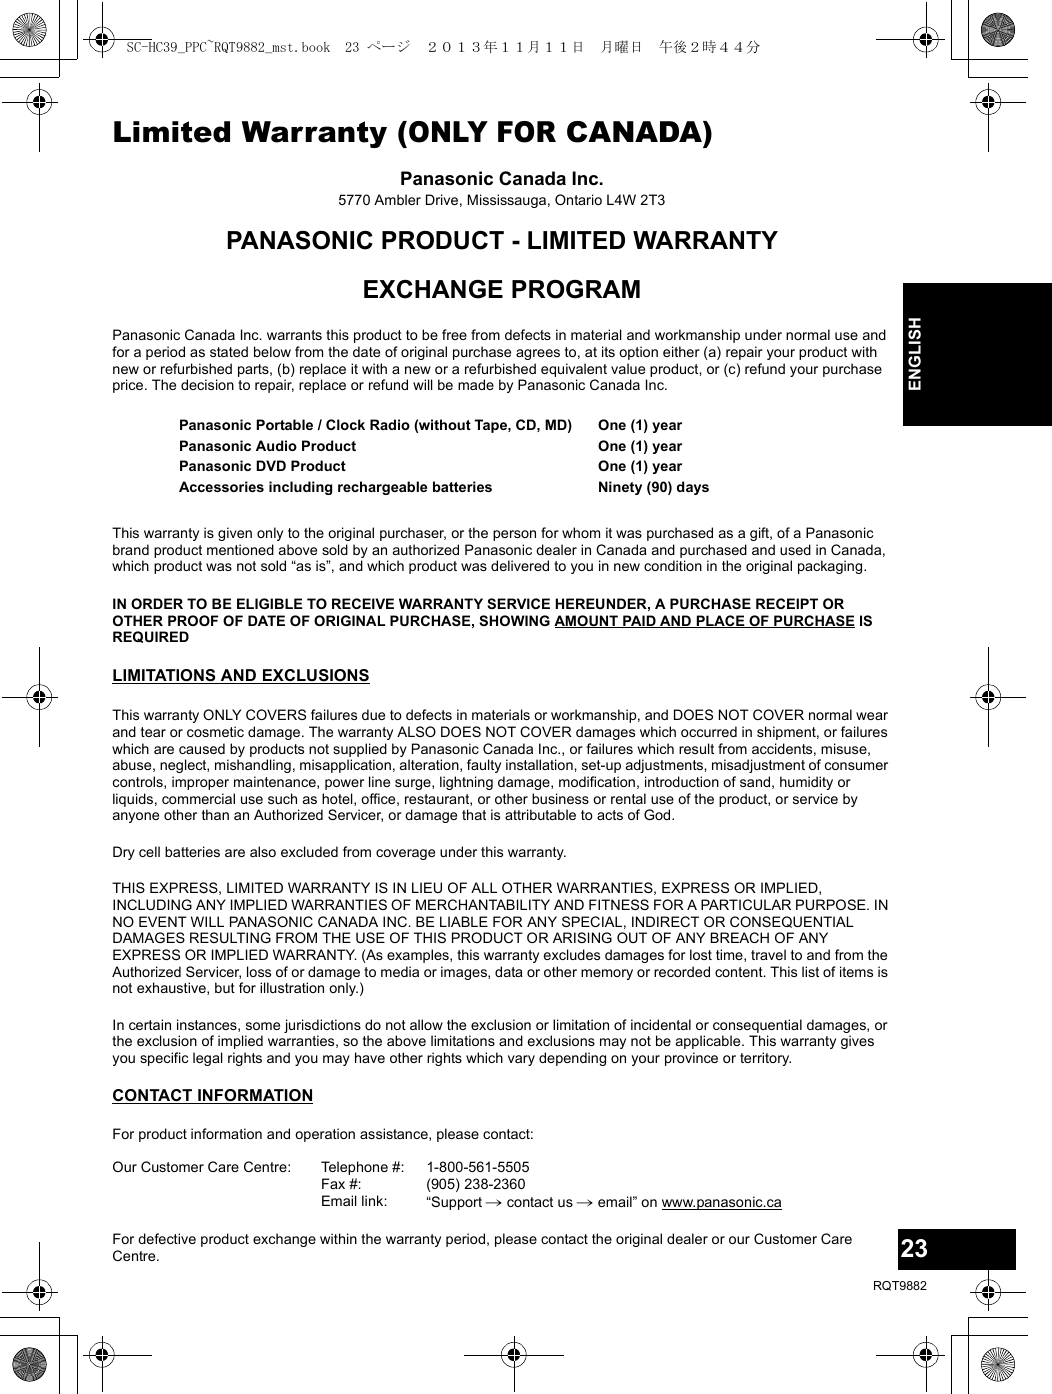 23RQT988223ENGLISHLimited Warranty (ONLY FOR CANADA)Panasonic Canada Inc.5770 Ambler Drive, Mississauga, Ontario L4W 2T3PANASONIC PRODUCT - LIMITED WARRANTYEXCHANGE PROGRAMPanasonic Canada Inc. warrants this product to be free from defects in material and workmanship under normal use and for a period as stated below from the date of original purchase agrees to, at its option either (a) repair your product with new or refurbished parts, (b) replace it with a new or a refurbished equivalent value product, or (c) refund your purchase price. The decision to repair, replace or refund will be made by Panasonic Canada Inc.This warranty is given only to the original purchaser, or the person for whom it was purchased as a gift, of a Panasonic brand product mentioned above sold by an authorized Panasonic dealer in Canada and purchased and used in Canada, which product was not sold “as is”, and which product was delivered to you in new condition in the original packaging.IN ORDER TO BE ELIGIBLE TO RECEIVE WARRANTY SERVICE HEREUNDER, A PURCHASE RECEIPT OR OTHER PROOF OF DATE OF ORIGINAL PURCHASE, SHOWING AMOUNT PAID AND PLACE OF PURCHASE IS REQUIRED LIMITATIONS AND EXCLUSIONSThis warranty ONLY COVERS failures due to defects in materials or workmanship, and DOES NOT COVER normal wear and tear or cosmetic damage. The warranty ALSO DOES NOT COVER damages which occurred in shipment, or failures which are caused by products not supplied by Panasonic Canada Inc., or failures which result from accidents, misuse, abuse, neglect, mishandling, misapplication, alteration, faulty installation, set-up adjustments, misadjustment of consumer controls, improper maintenance, power line surge, lightning damage, modification, introduction of sand, humidity or liquids, commercial use such as hotel, office, restaurant, or other business or rental use of the product, or service by anyone other than an Authorized Servicer, or damage that is attributable to acts of God.Dry cell batteries are also excluded from coverage under this warranty.THIS EXPRESS, LIMITED WARRANTY IS IN LIEU OF ALL OTHER WARRANTIES, EXPRESS OR IMPLIED, INCLUDING ANY IMPLIED WARRANTIES OF MERCHANTABILITY AND FITNESS FOR A PARTICULAR PURPOSE. IN NO EVENT WILL PANASONIC CANADA INC. BE LIABLE FOR ANY SPECIAL, INDIRECT OR CONSEQUENTIAL DAMAGES RESULTING FROM THE USE OF THIS PRODUCT OR ARISING OUT OF ANY BREACH OF ANY EXPRESS OR IMPLIED WARRANTY. (As examples, this warranty excludes damages for lost time, travel to and from the Authorized Servicer, loss of or damage to media or images, data or other memory or recorded content. This list of items is not exhaustive, but for illustration only.)In certain instances, some jurisdictions do not allow the exclusion or limitation of incidental or consequential damages, or the exclusion of implied warranties, so the above limitations and exclusions may not be applicable. This warranty gives you specific legal rights and you may have other rights which vary depending on your province or territory.CONTACT INFORMATIONPanasonic Portable / Clock Radio (without Tape, CD, MD)Panasonic Audio ProductPanasonic DVD ProductAccessories including rechargeable batteriesOne (1) yearOne (1) yearOne (1) yearNinety (90) daysFor product information and operation assistance, please contact:Our Customer Care Centre: Telephone #:Fax #:Email link:1-800-561-5505(905) 238-2360“Support # contact us # email” on www.panasonic.caFor defective product exchange within the warranty period, please contact the original dealer or our Customer Care Centre.SC-HC39_PPC~RQT9882_mst.book  23 ページ  ２０１３年１１月１１日　月曜日　午後２時４４分